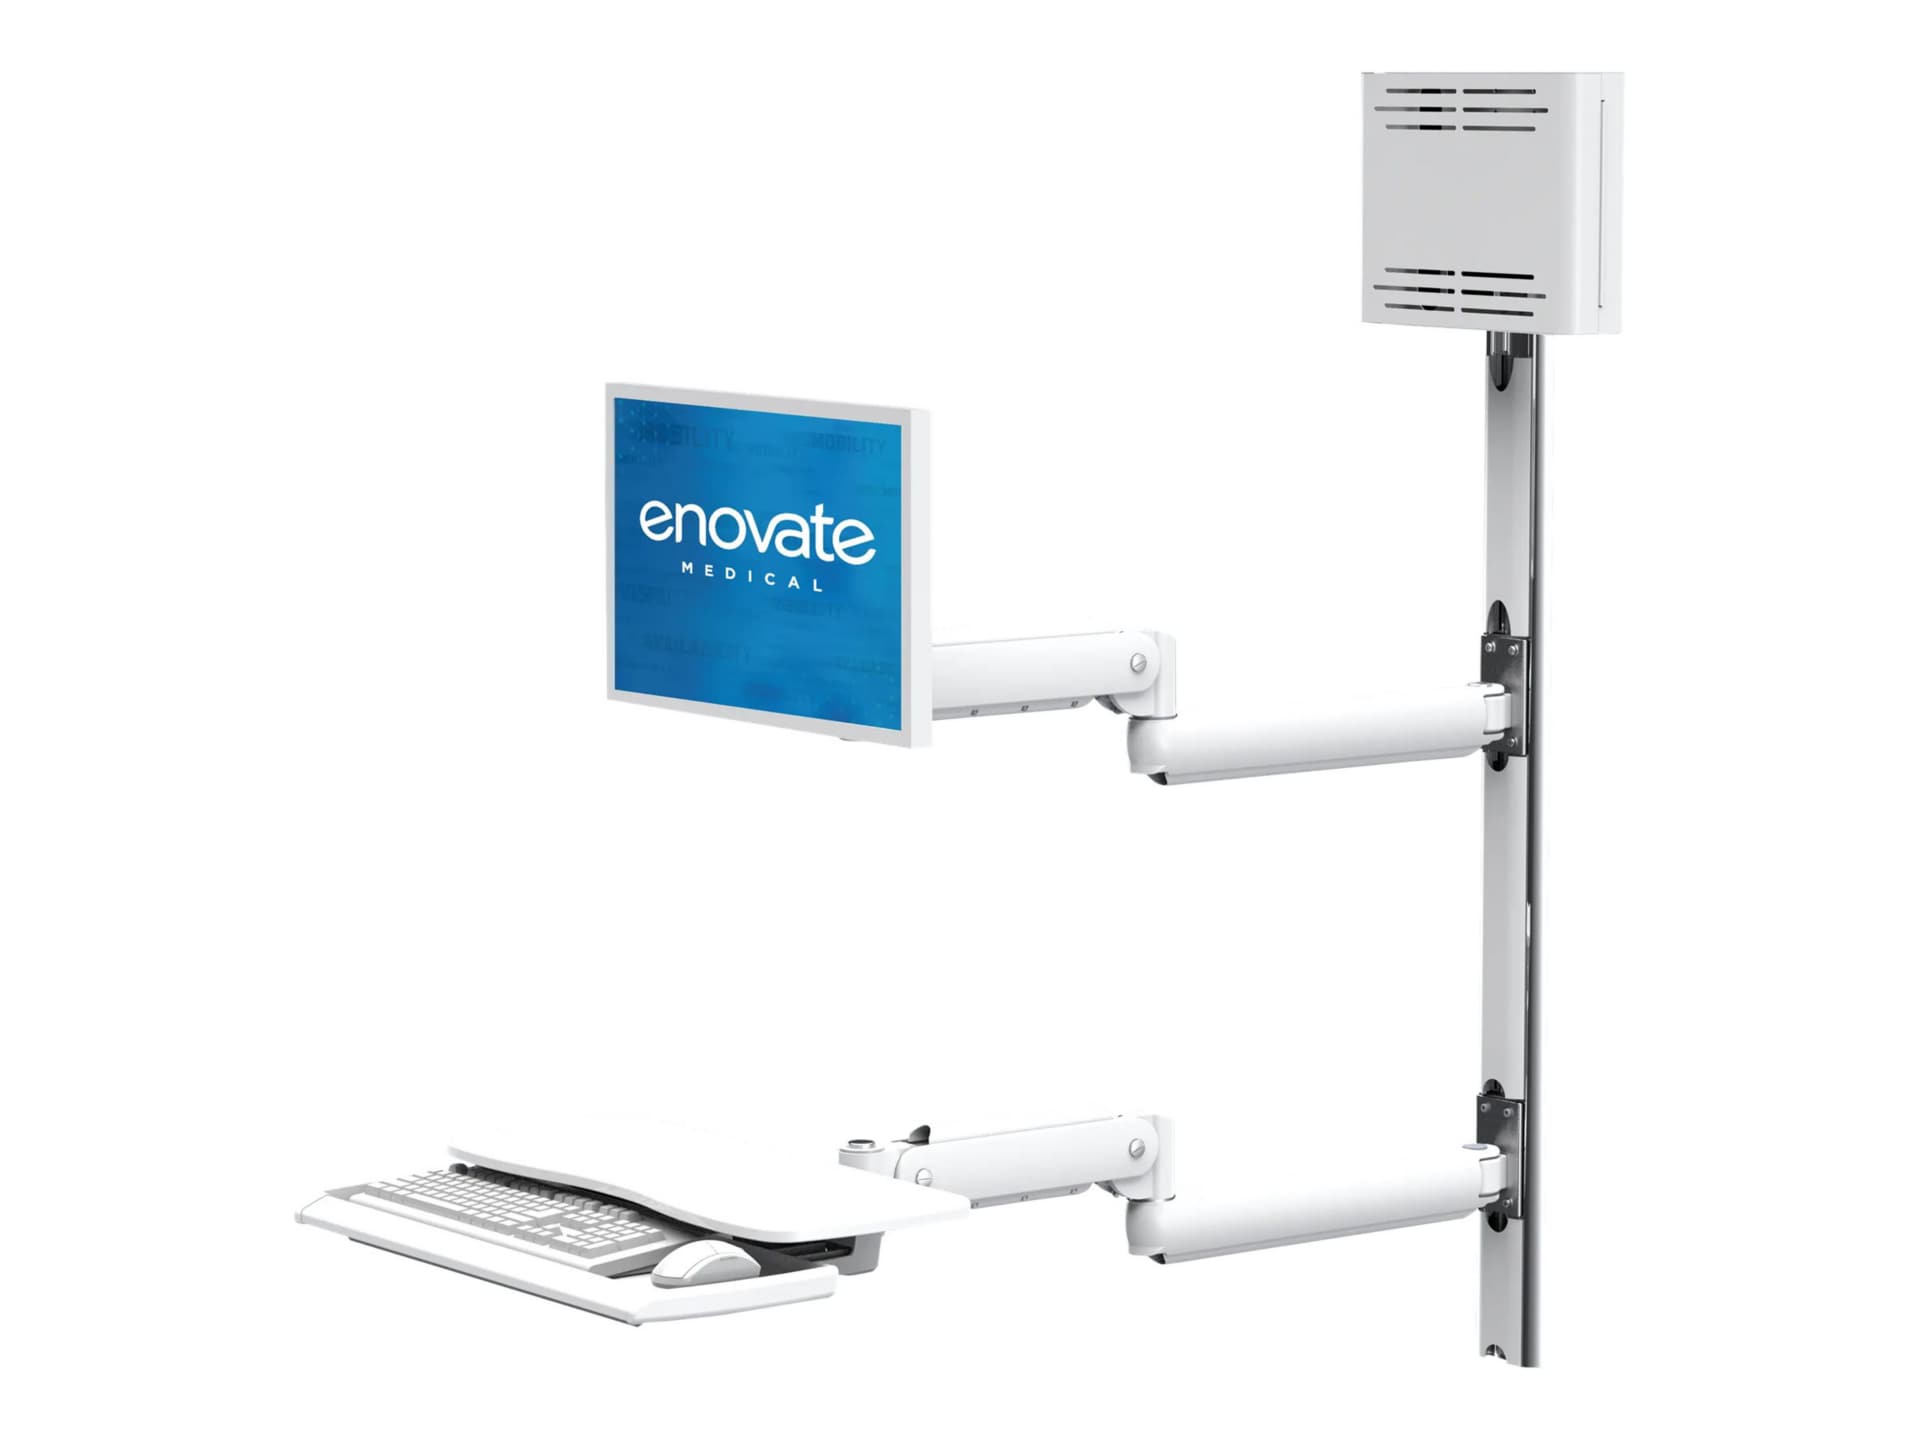 Enovate Medical e997 mounting kit - for LCD display / keyboard / mouse